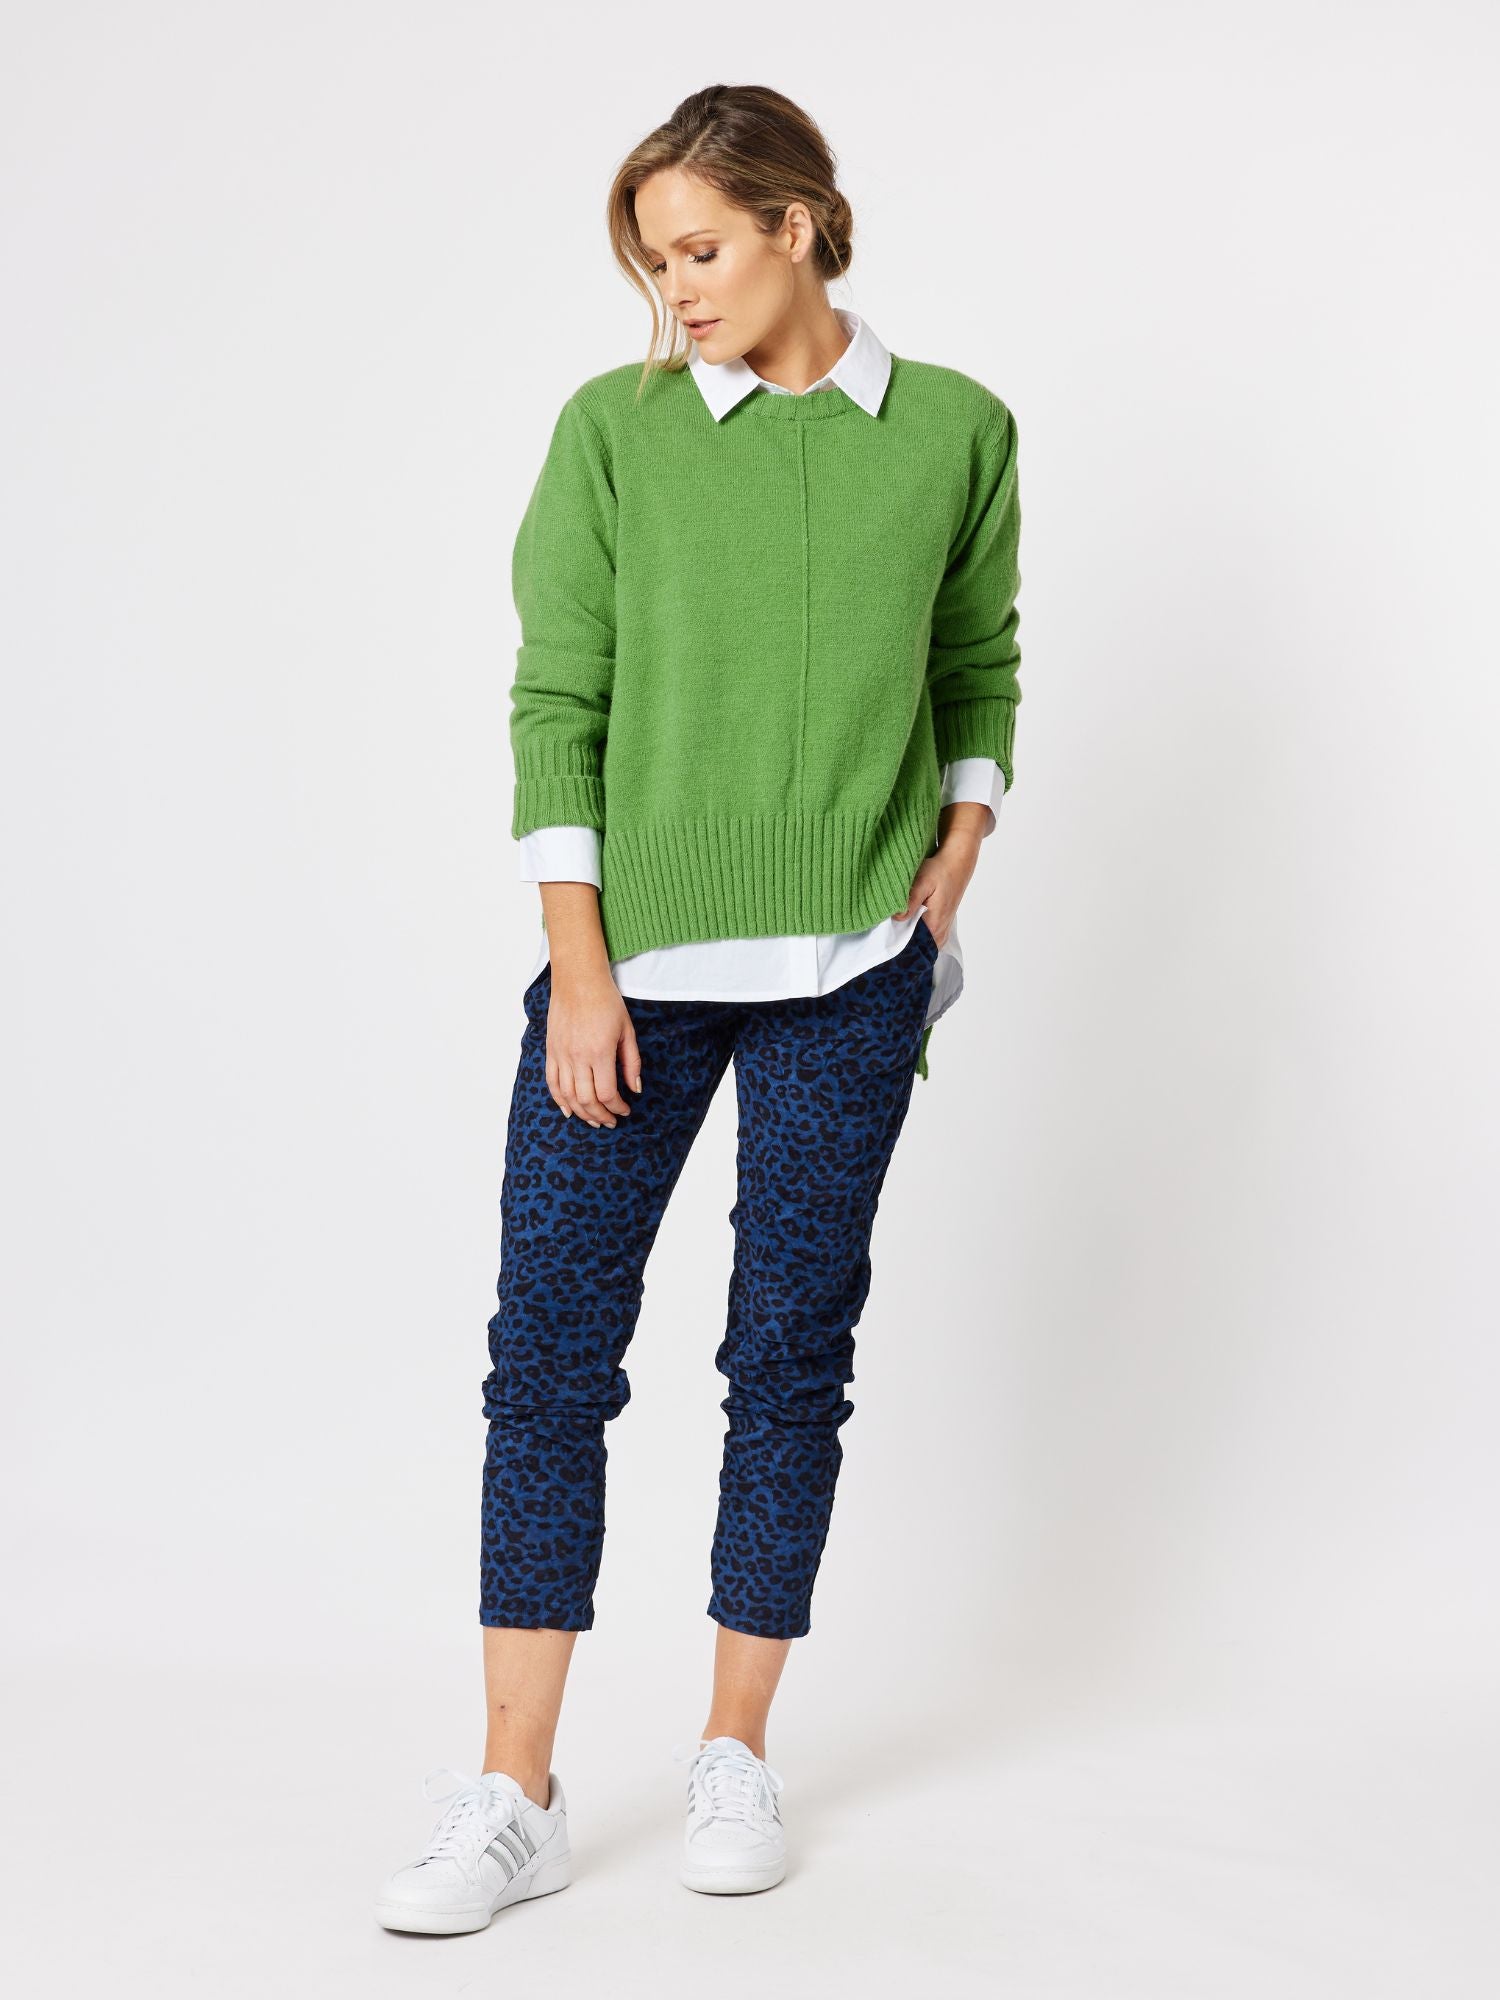 Madeline High Lo Knit Top Top - Green